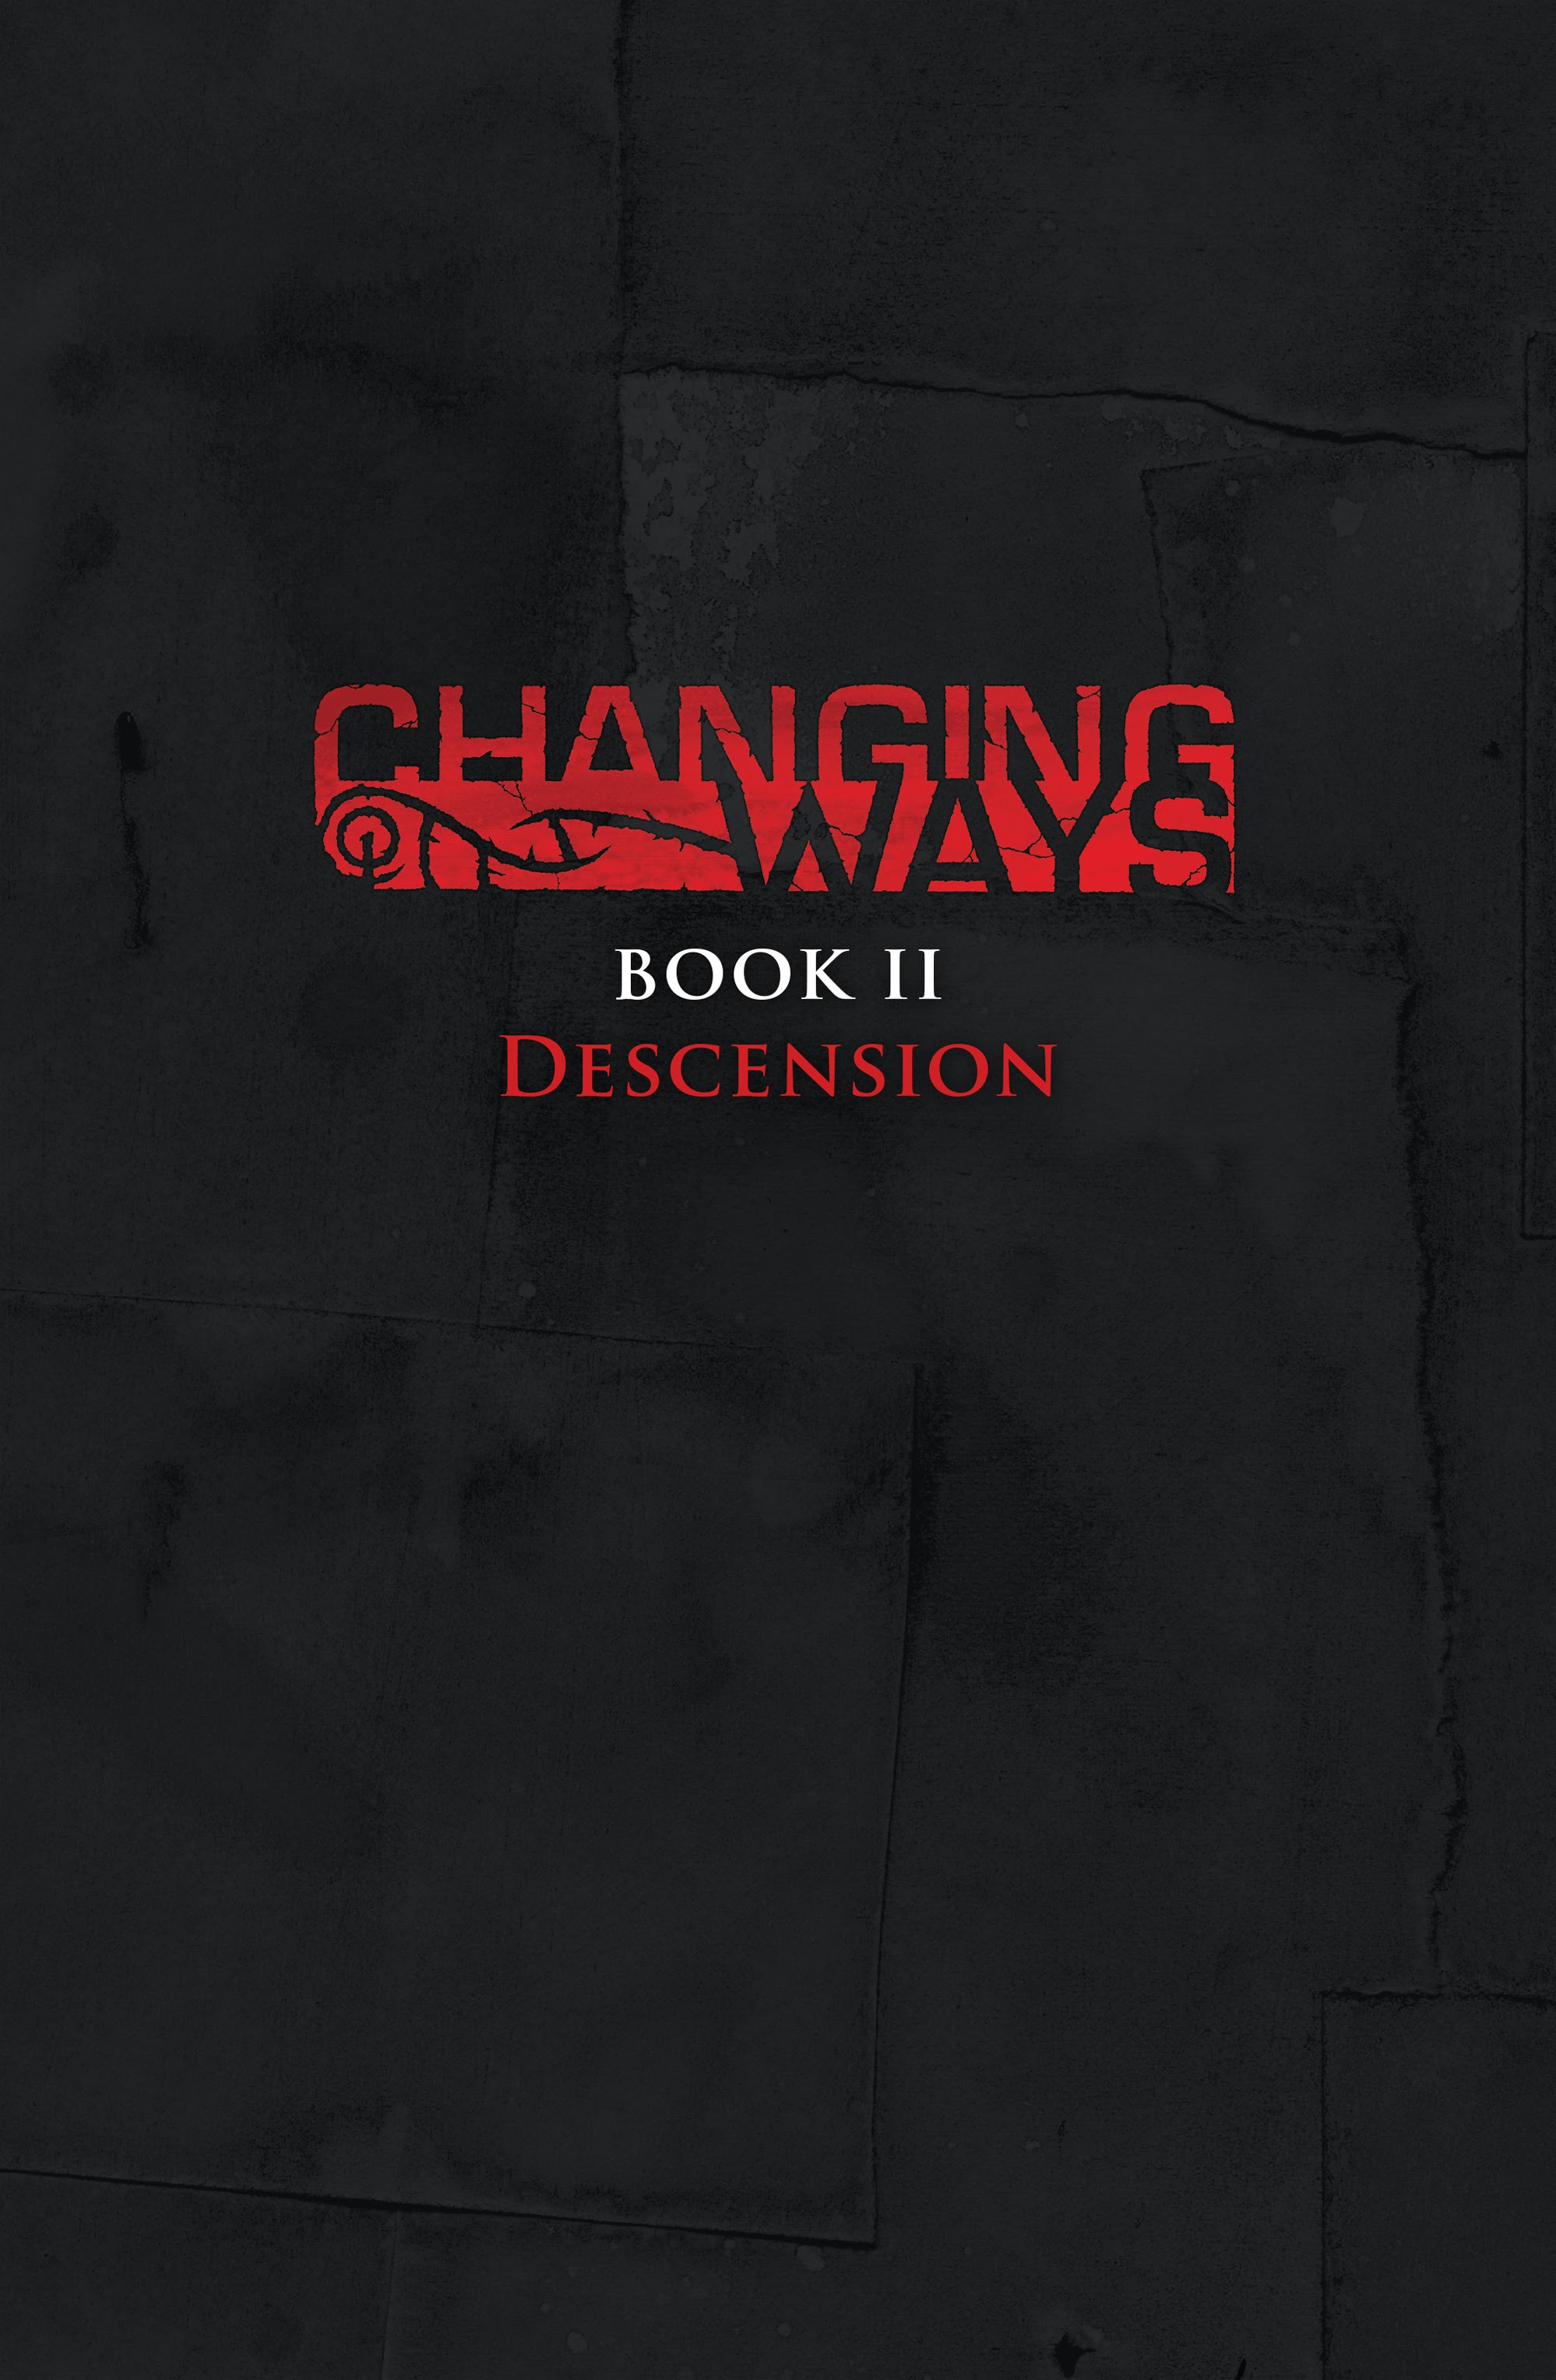 Read online Changing Ways comic -  Issue # TPB 2 - 3